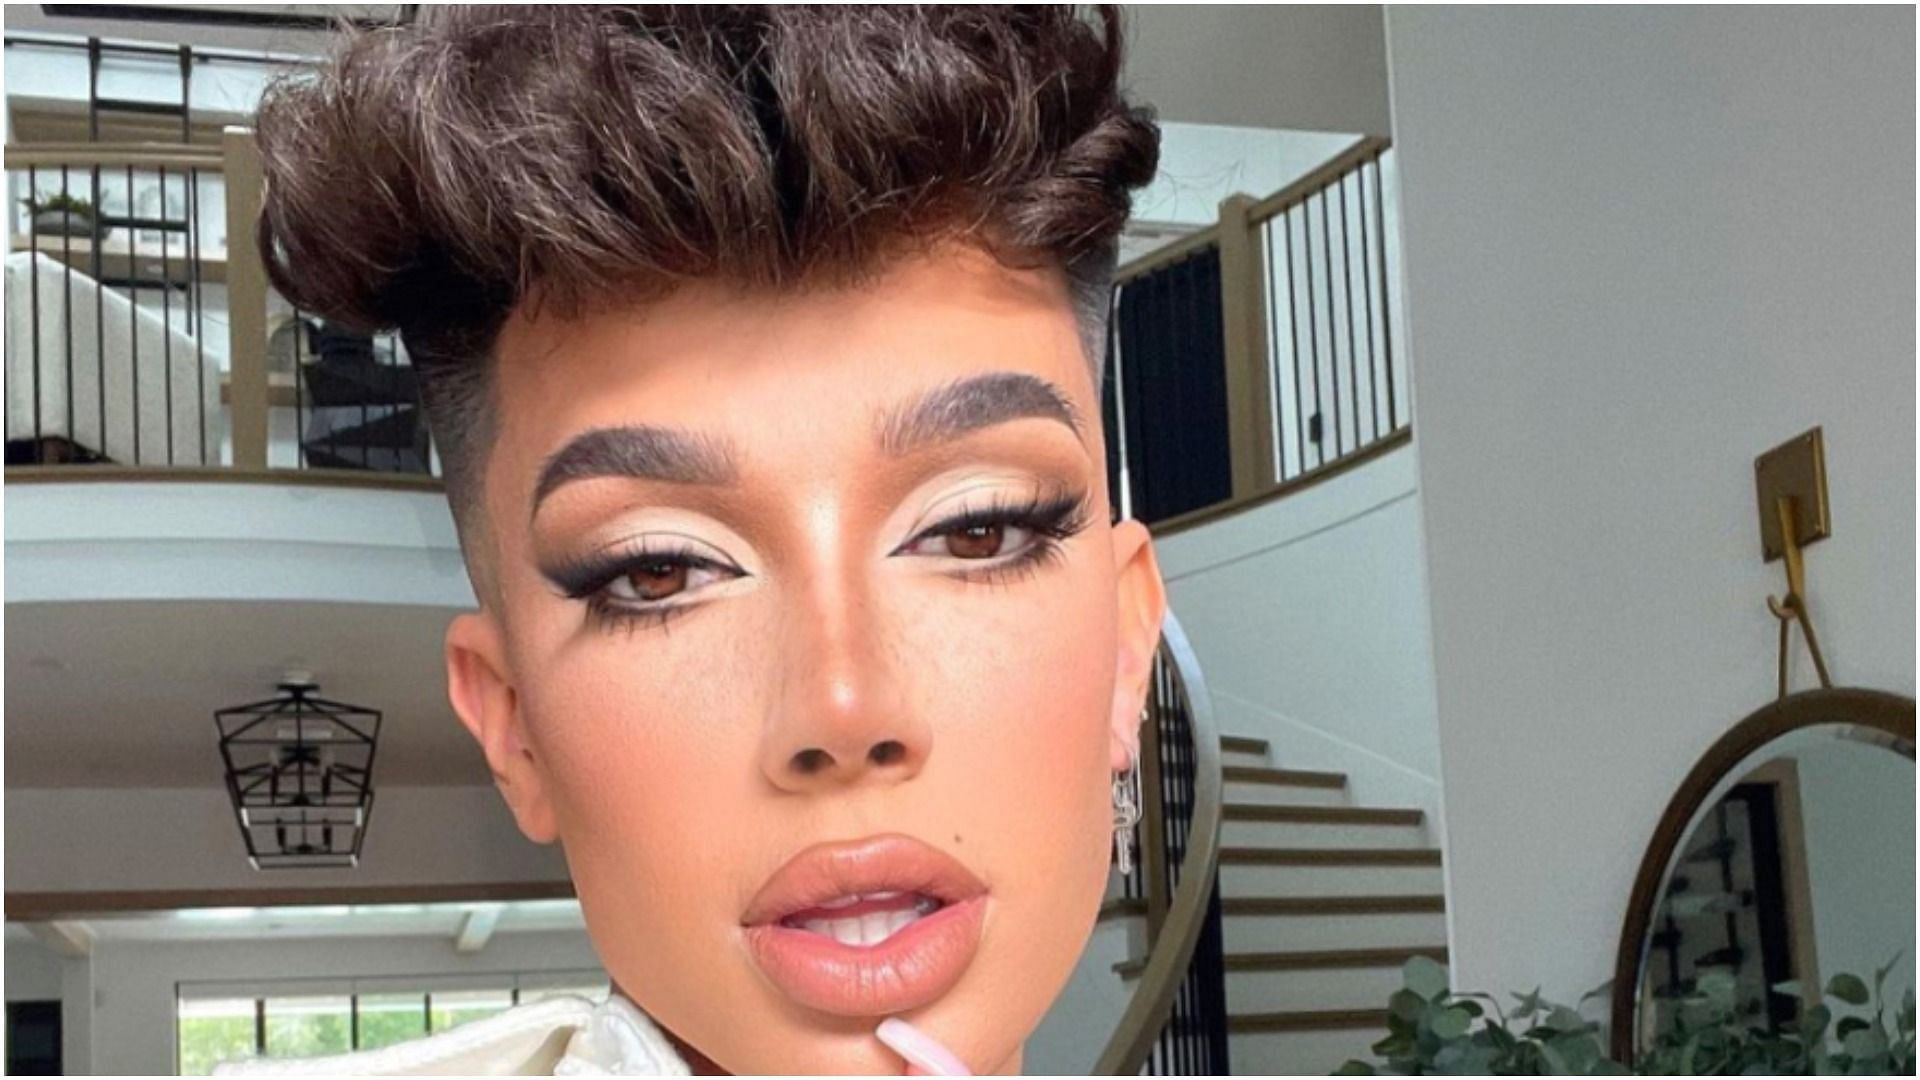 James Charles receives flack for attending Coachella 2022 following